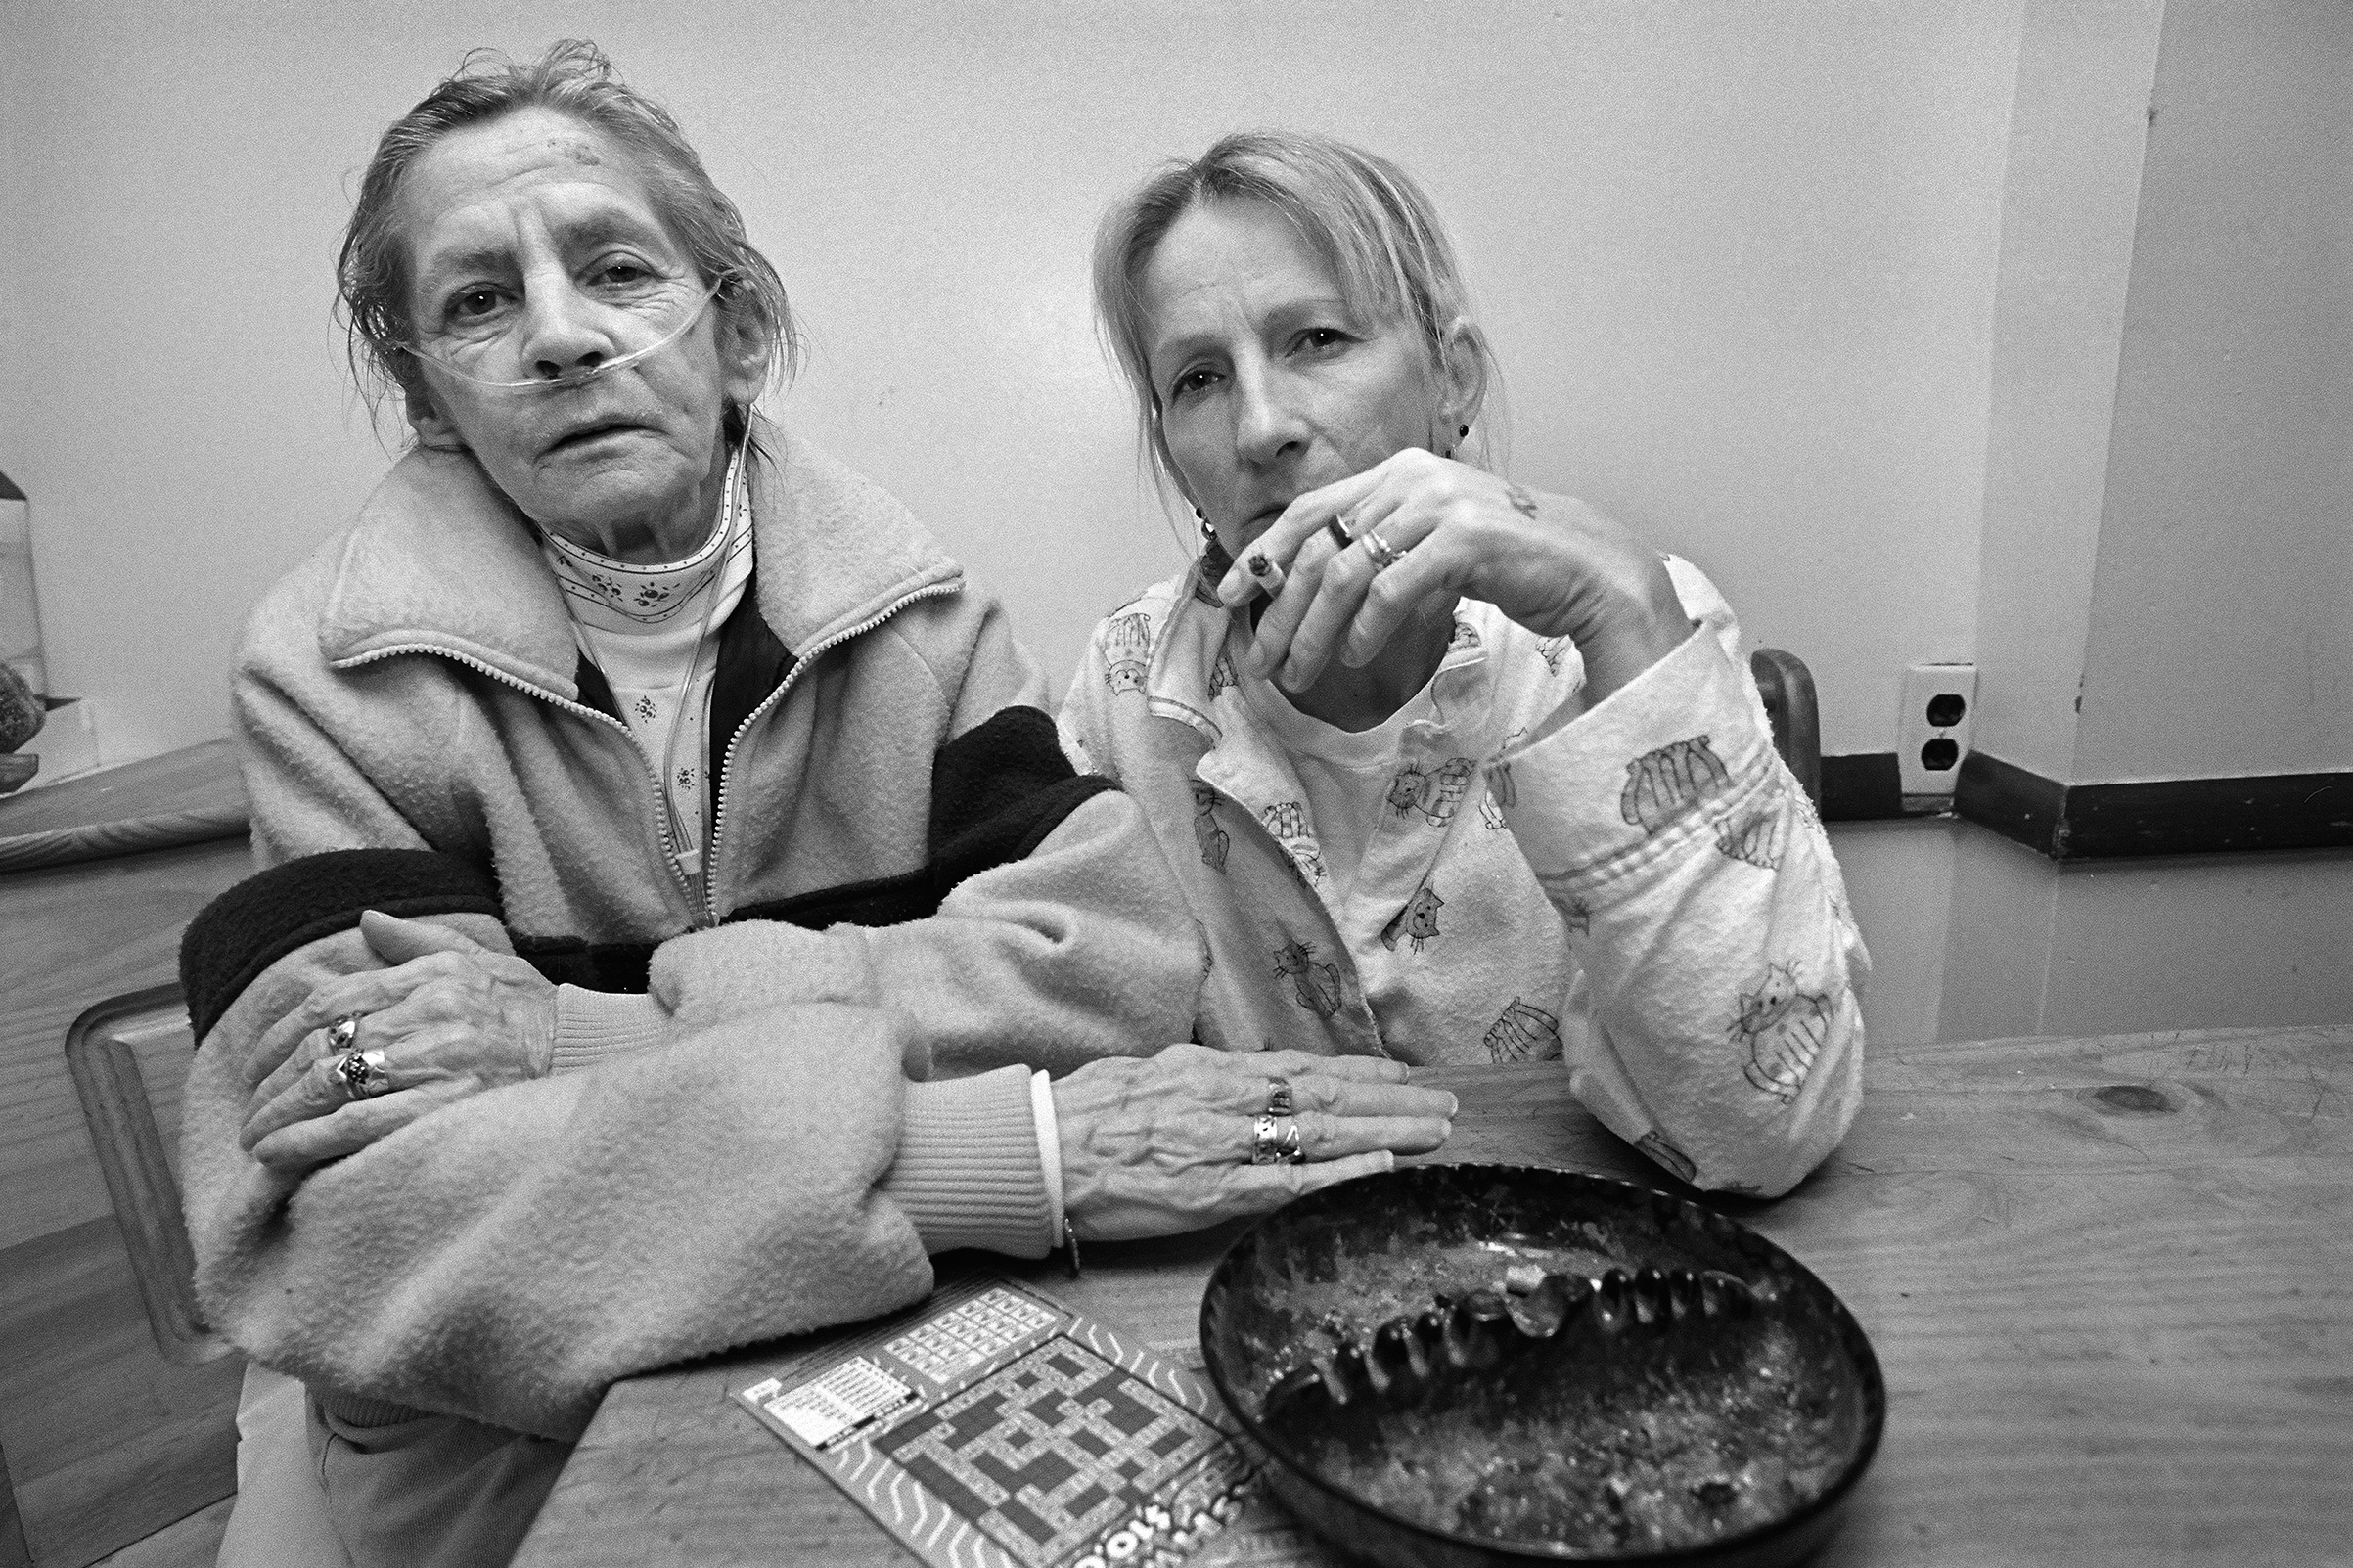 Wilhelmina and Deb in 2005. "This was the summer Wilhelmina, Kayla’s grandmother moved into Debs house after her cancer had progressed to its final stages," says Kenneally. "When it was too hot outside, the girls stayed in Kayla’s living room and sang along to music videos, while Wilhelmina lay dying on one of the couches." (Brenda Ann Kenneally)